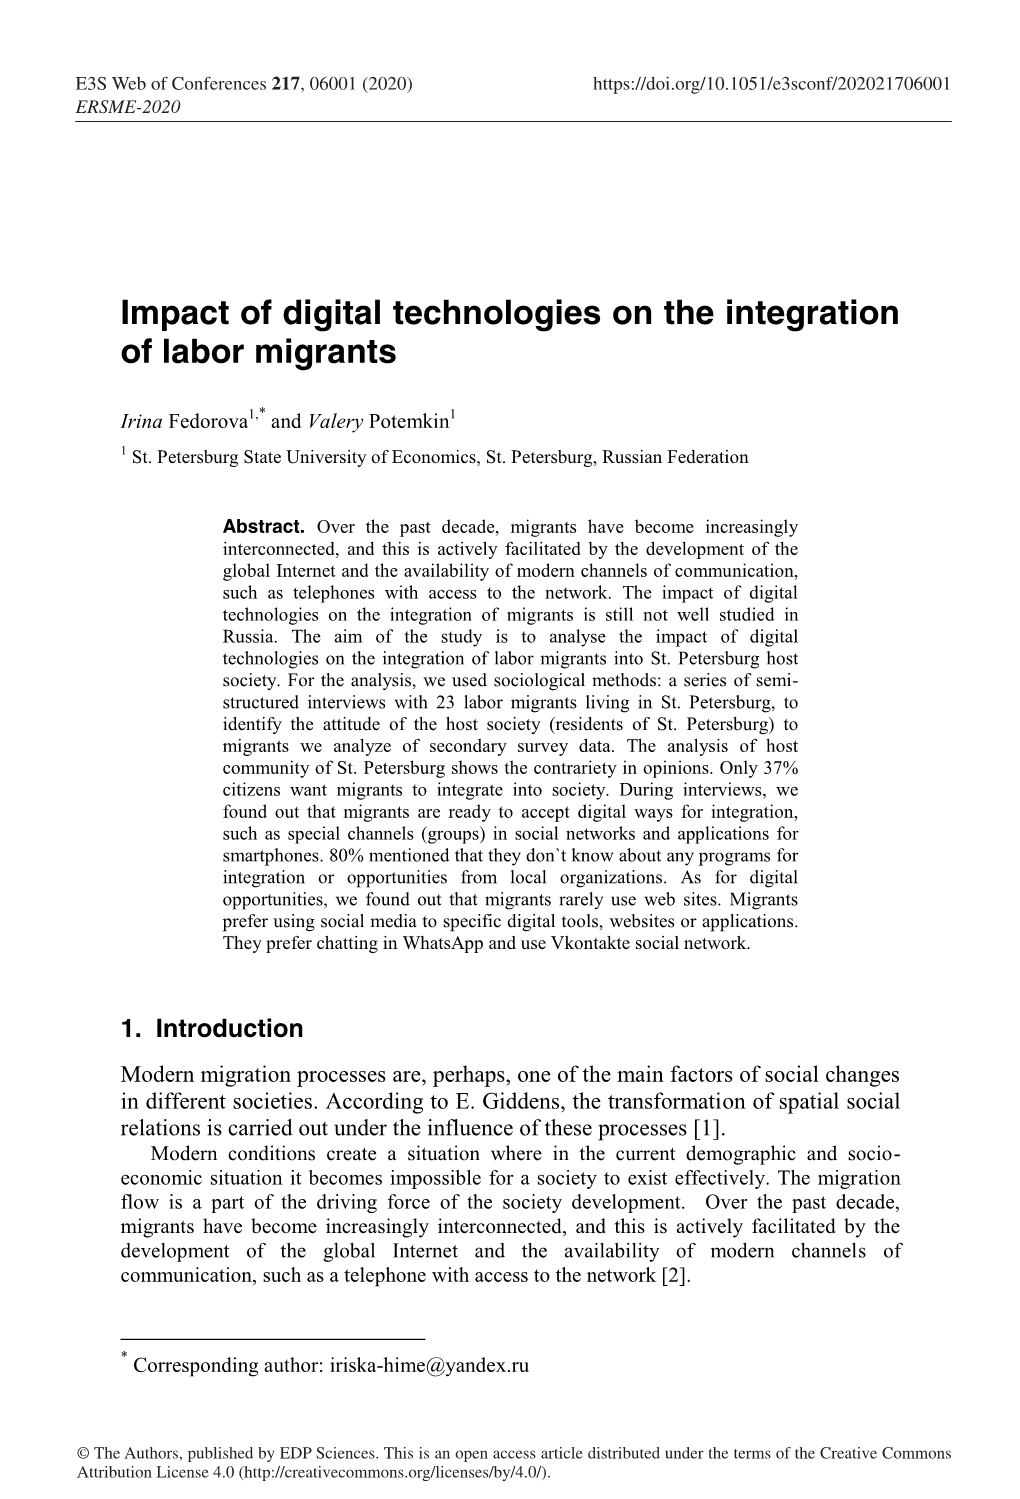 Impact of Digital Technologies on the Integration of Labor Migrants